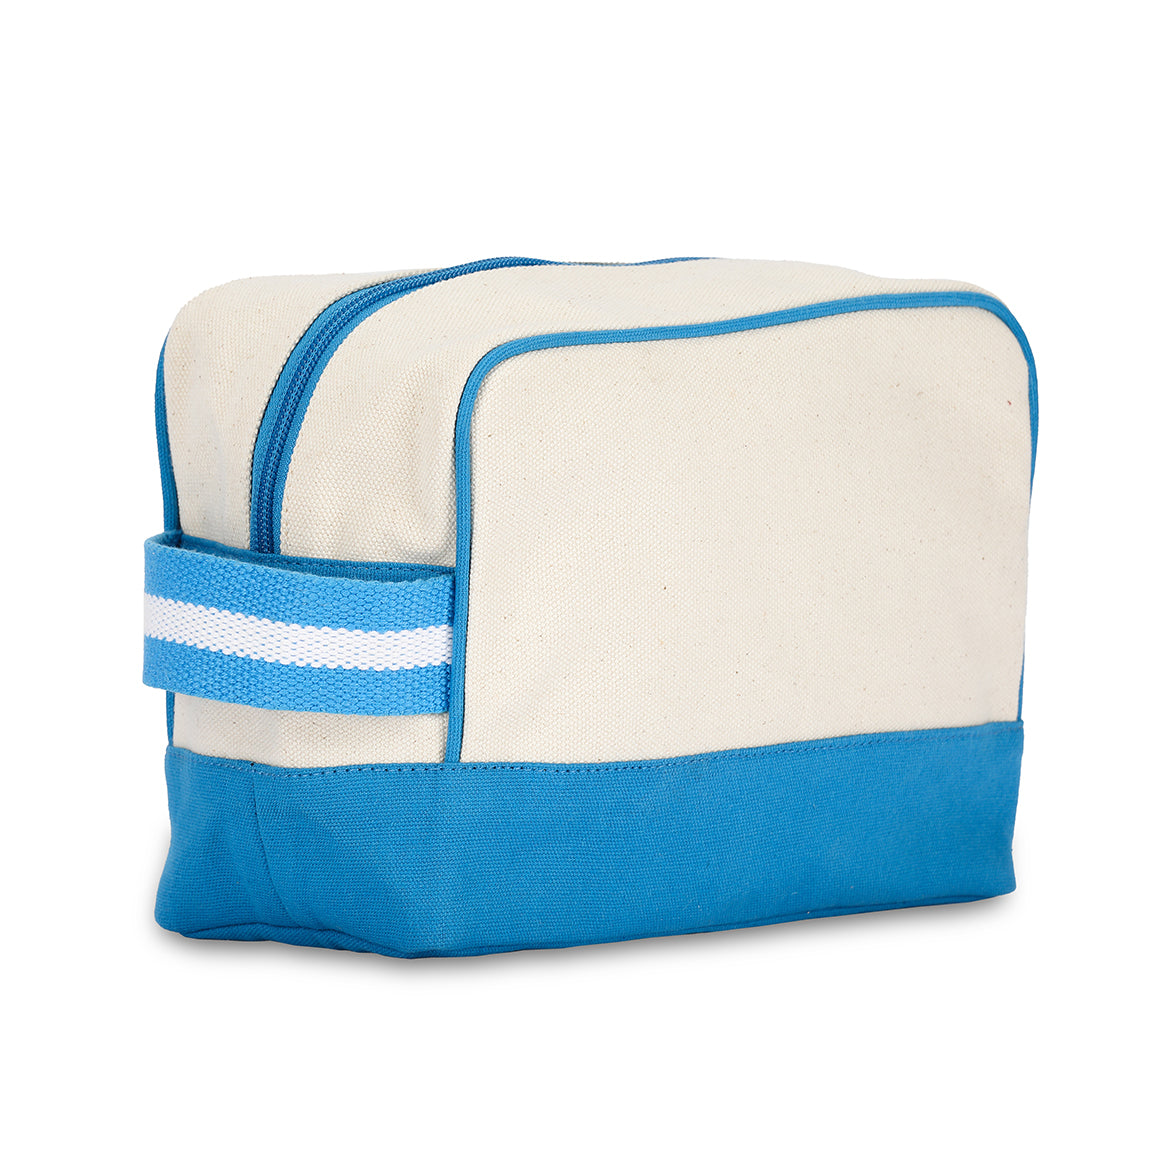 side view of natural canvas beauty bag with blue canvas on the bottom and loop on side made of blue and white cotton webbing